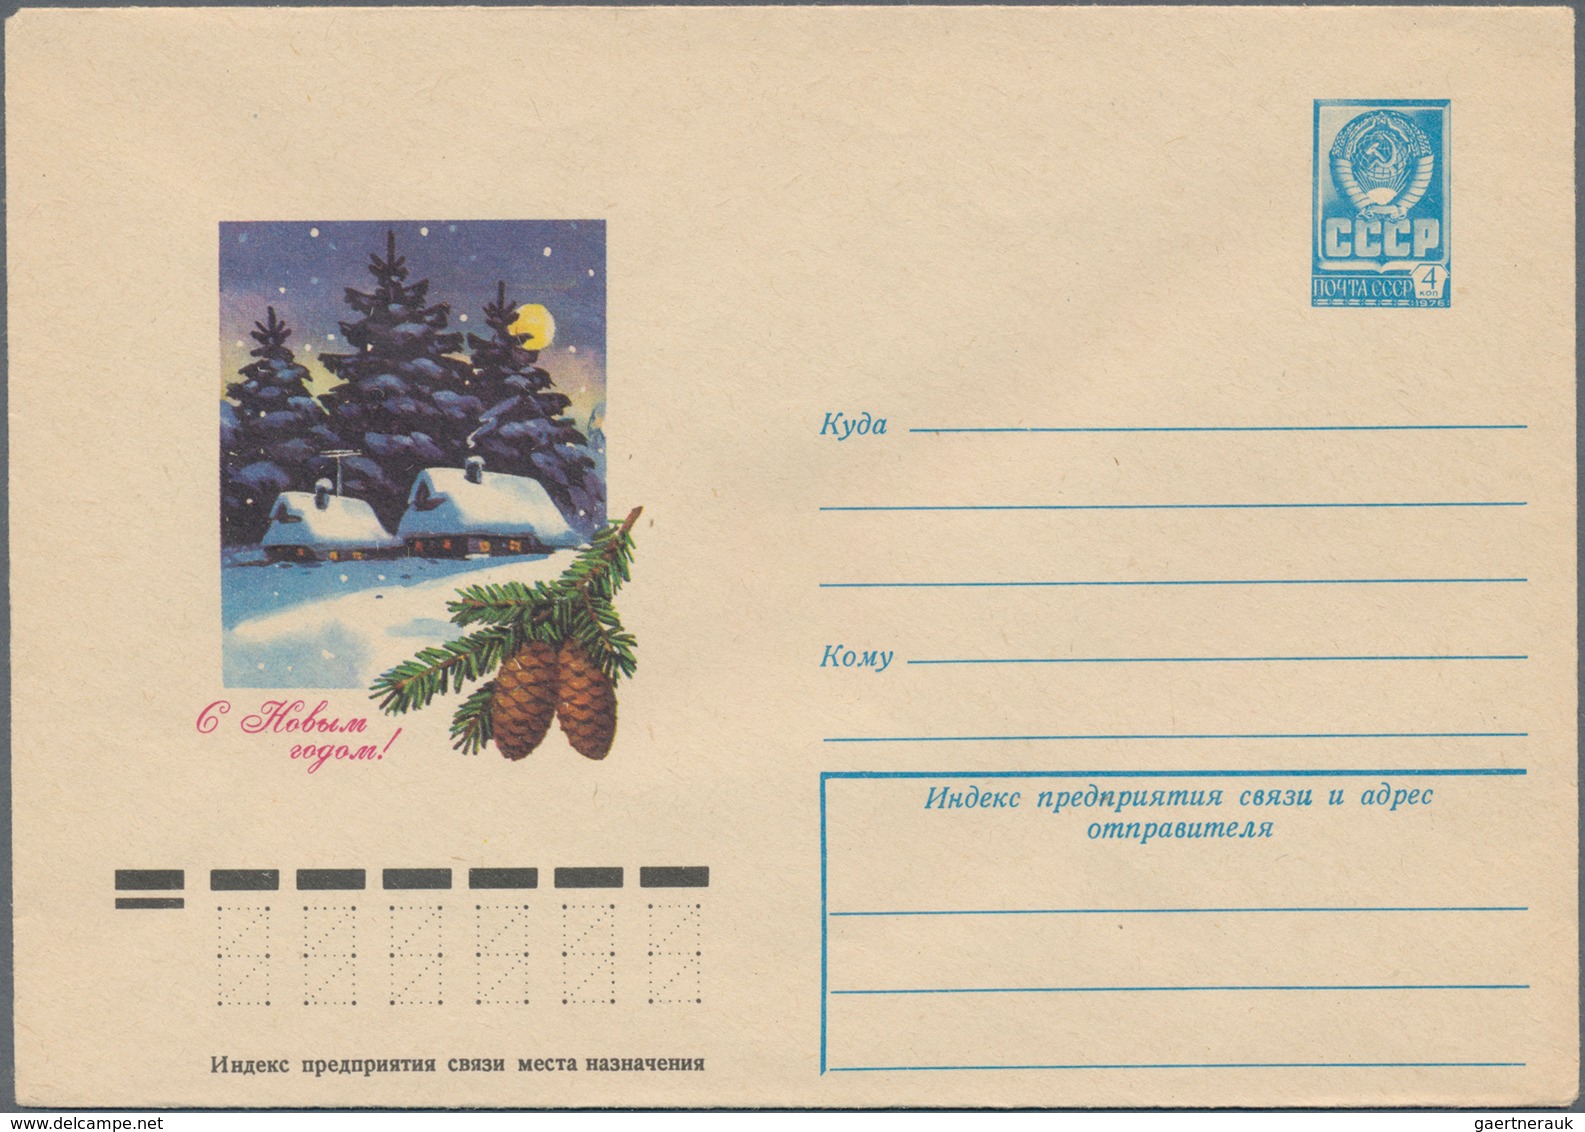 Russland - Ganzsachen: 1977/80 Ca. 1.125 Unused/CTO/used Pictured Postal Stationery Envelopes With A - Ganzsachen